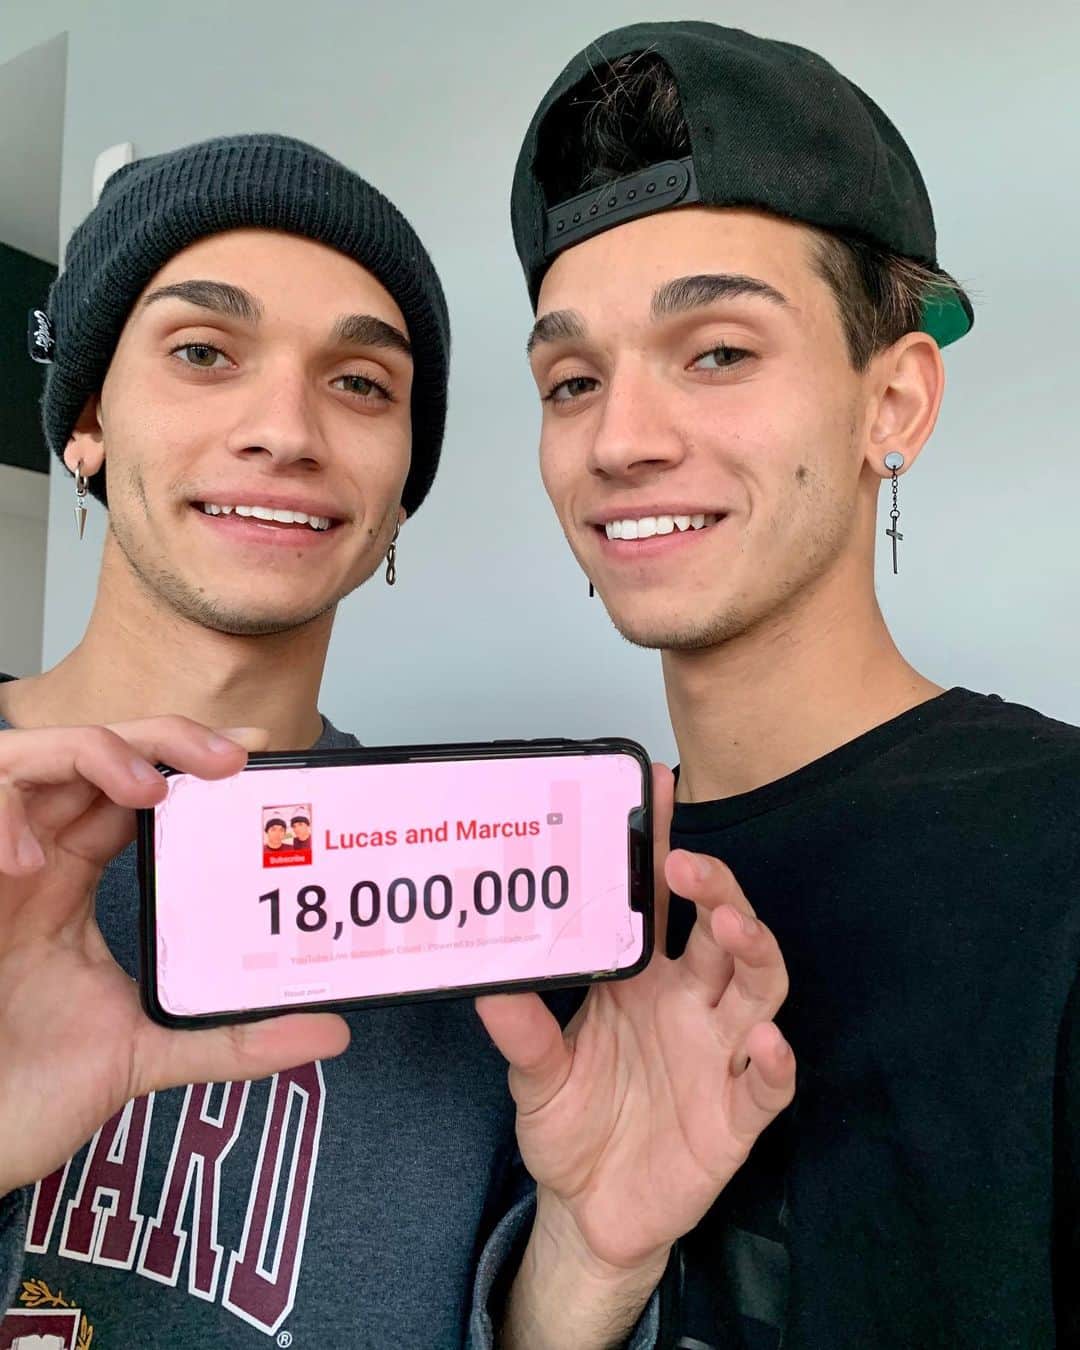 Lucas Dobreのインスタグラム：「18M ON YOUTUBE?!?!?! ARE WE DREAMING? Thank you so much for everything and supporting us! We love y’all so much 💪🏼❤️ We have the best supporters」